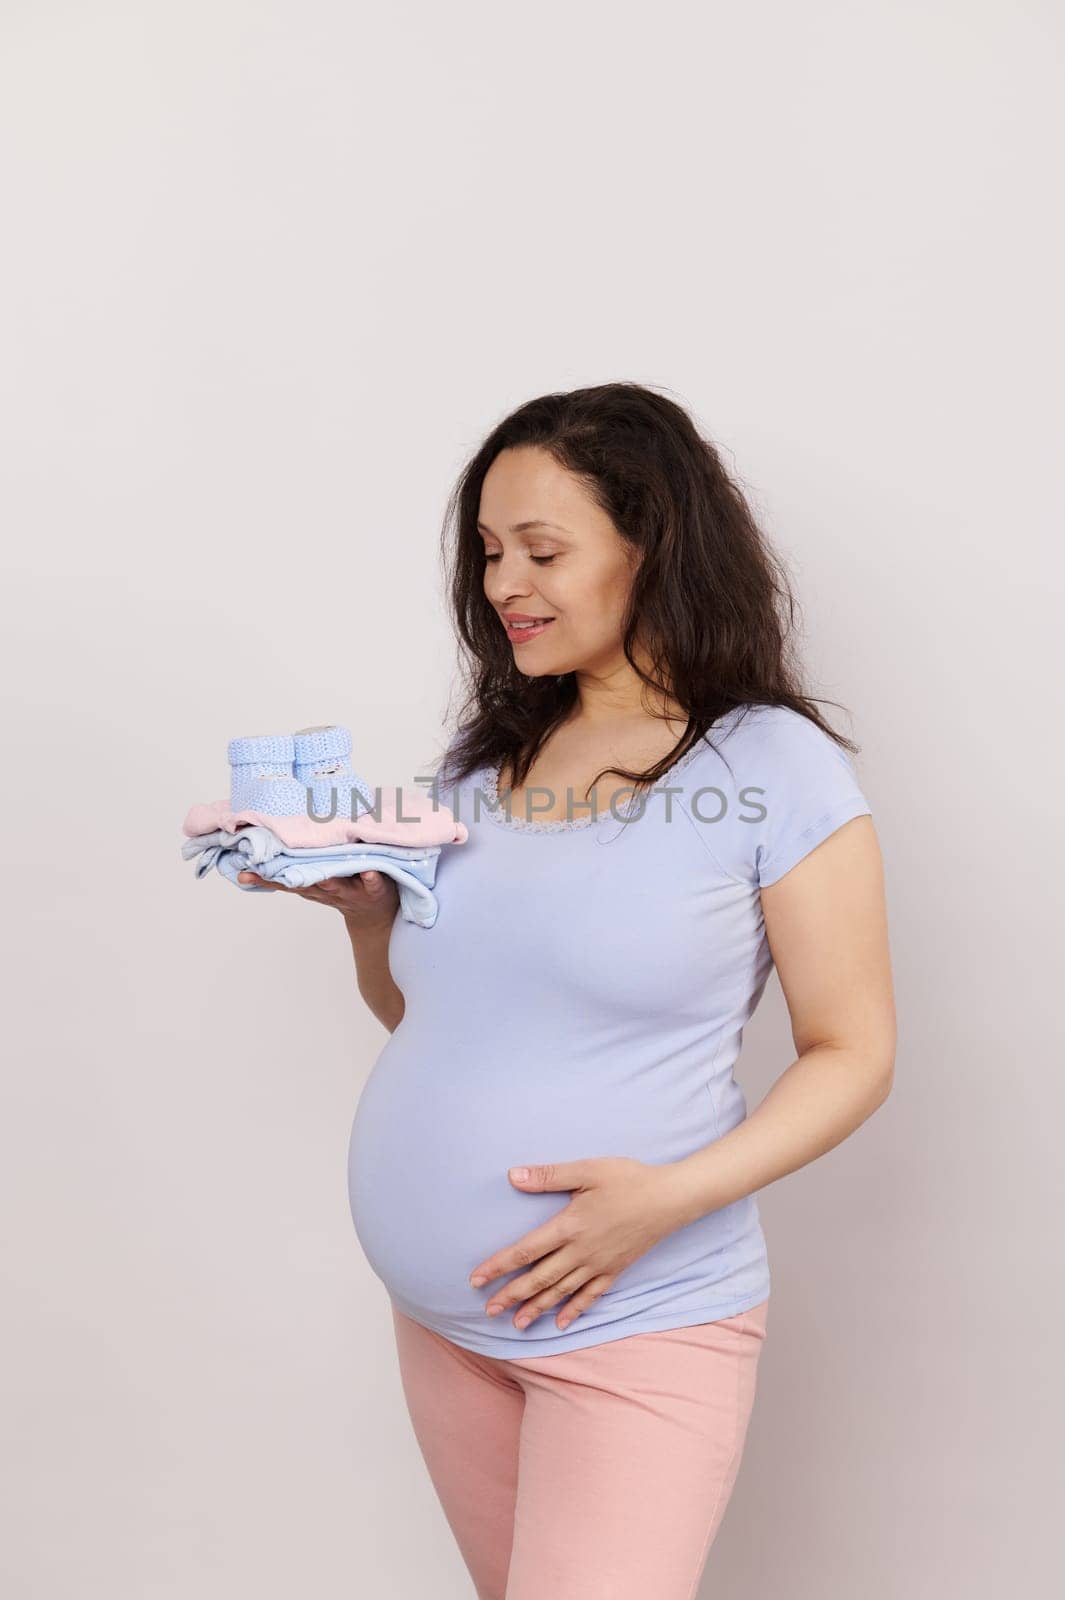 Happy pregnant future mother expecting baby, holds a pile of baby clothes, gently strokes her belly on white isolated background. Gravid female expressing positive emotions of pregnancy and maternity